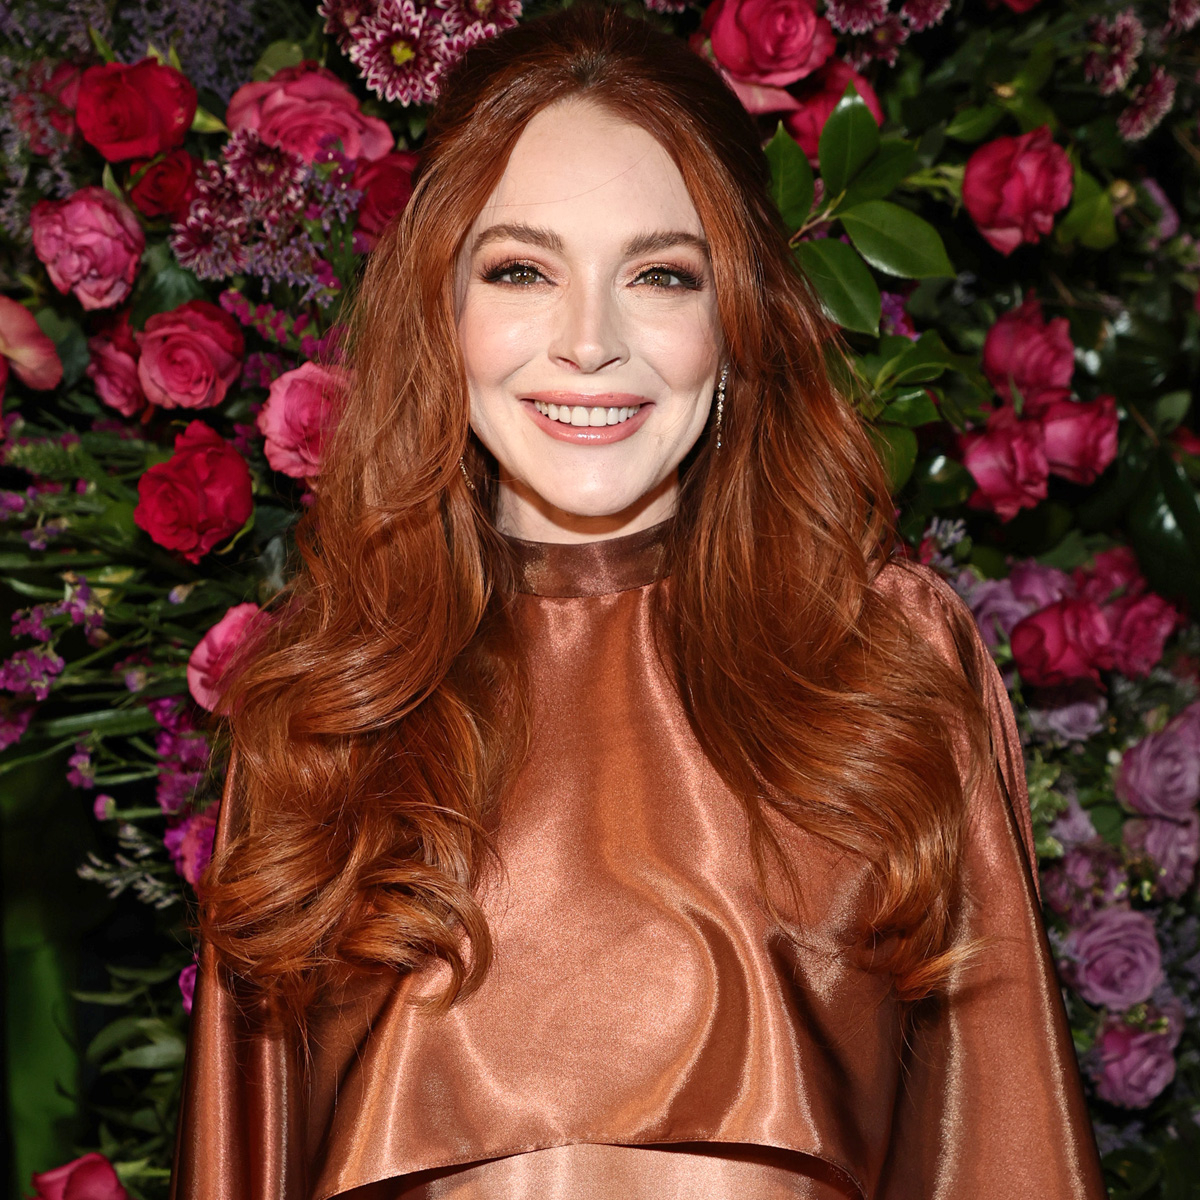 The Limit Does Not Exist On How Grool Pregnant Lindsay Lohan's Beach Getaway Is